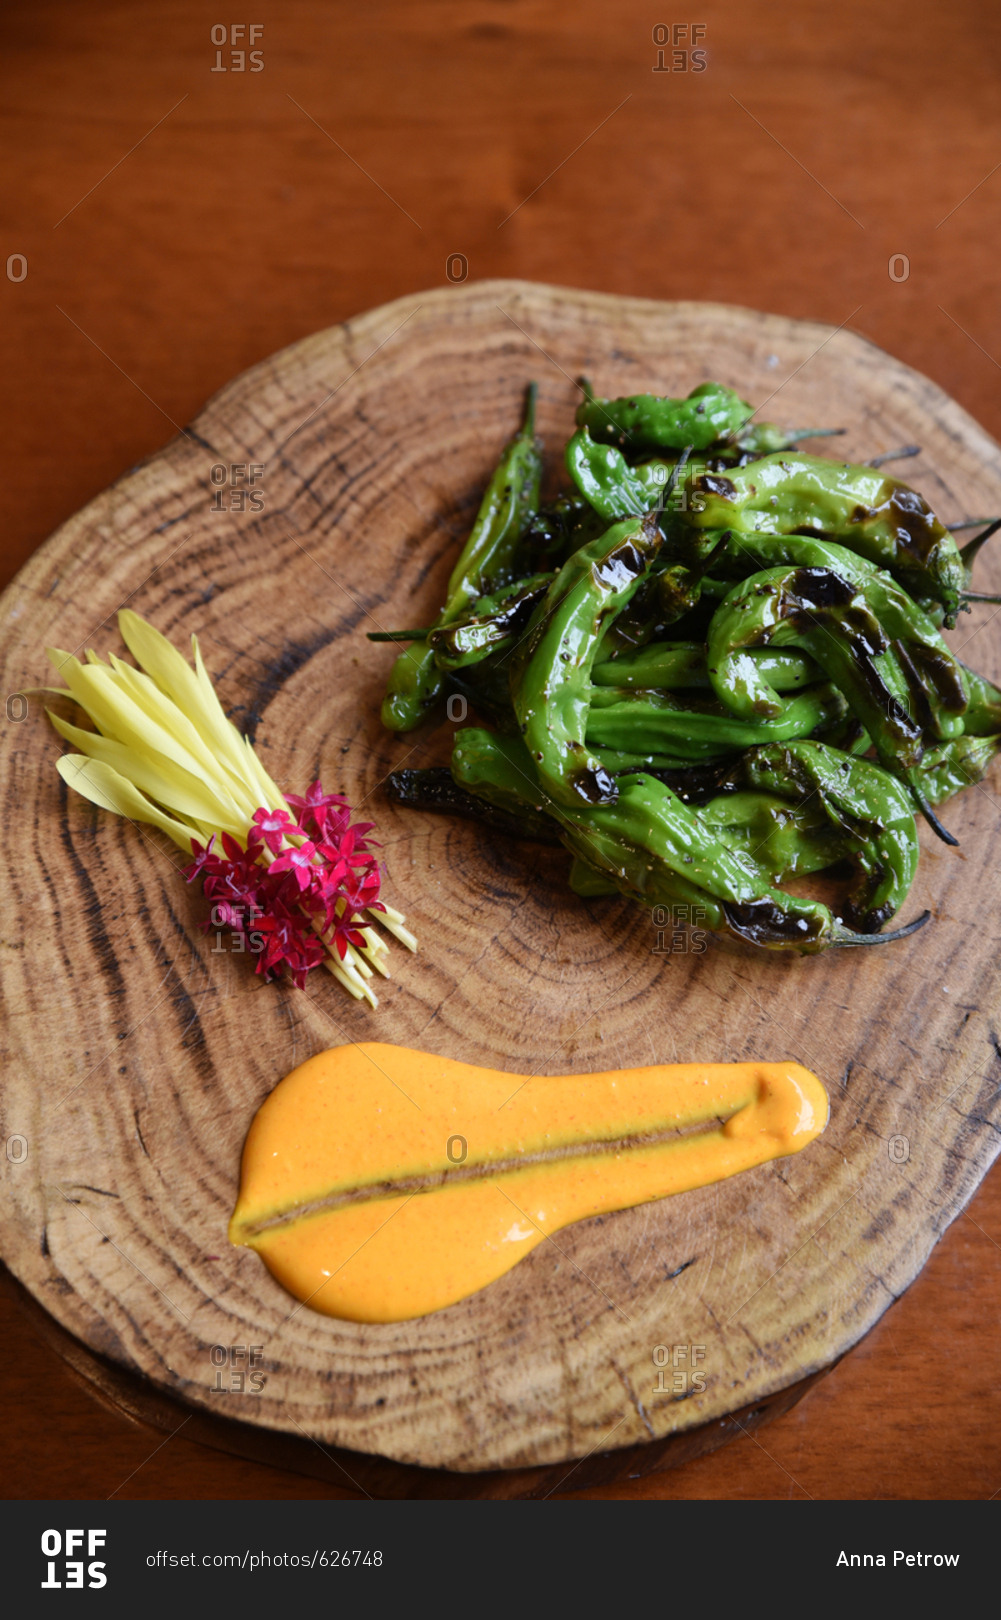 Roasted green chiles on a wooden disk with orange sauce